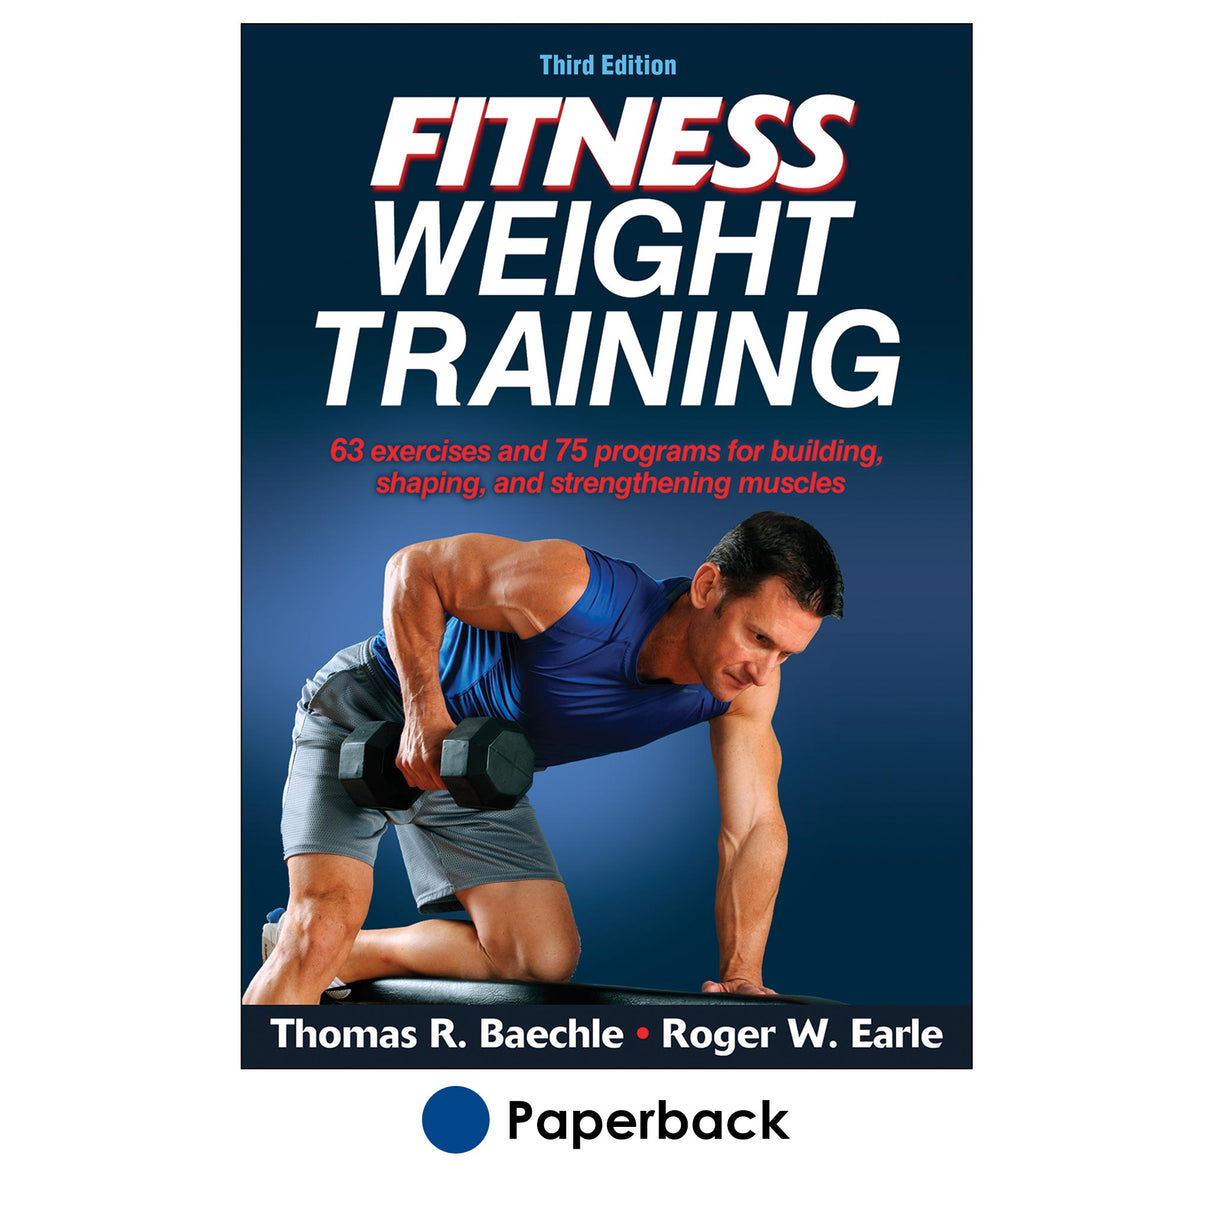 Fitness Weight Training-3rd Edition